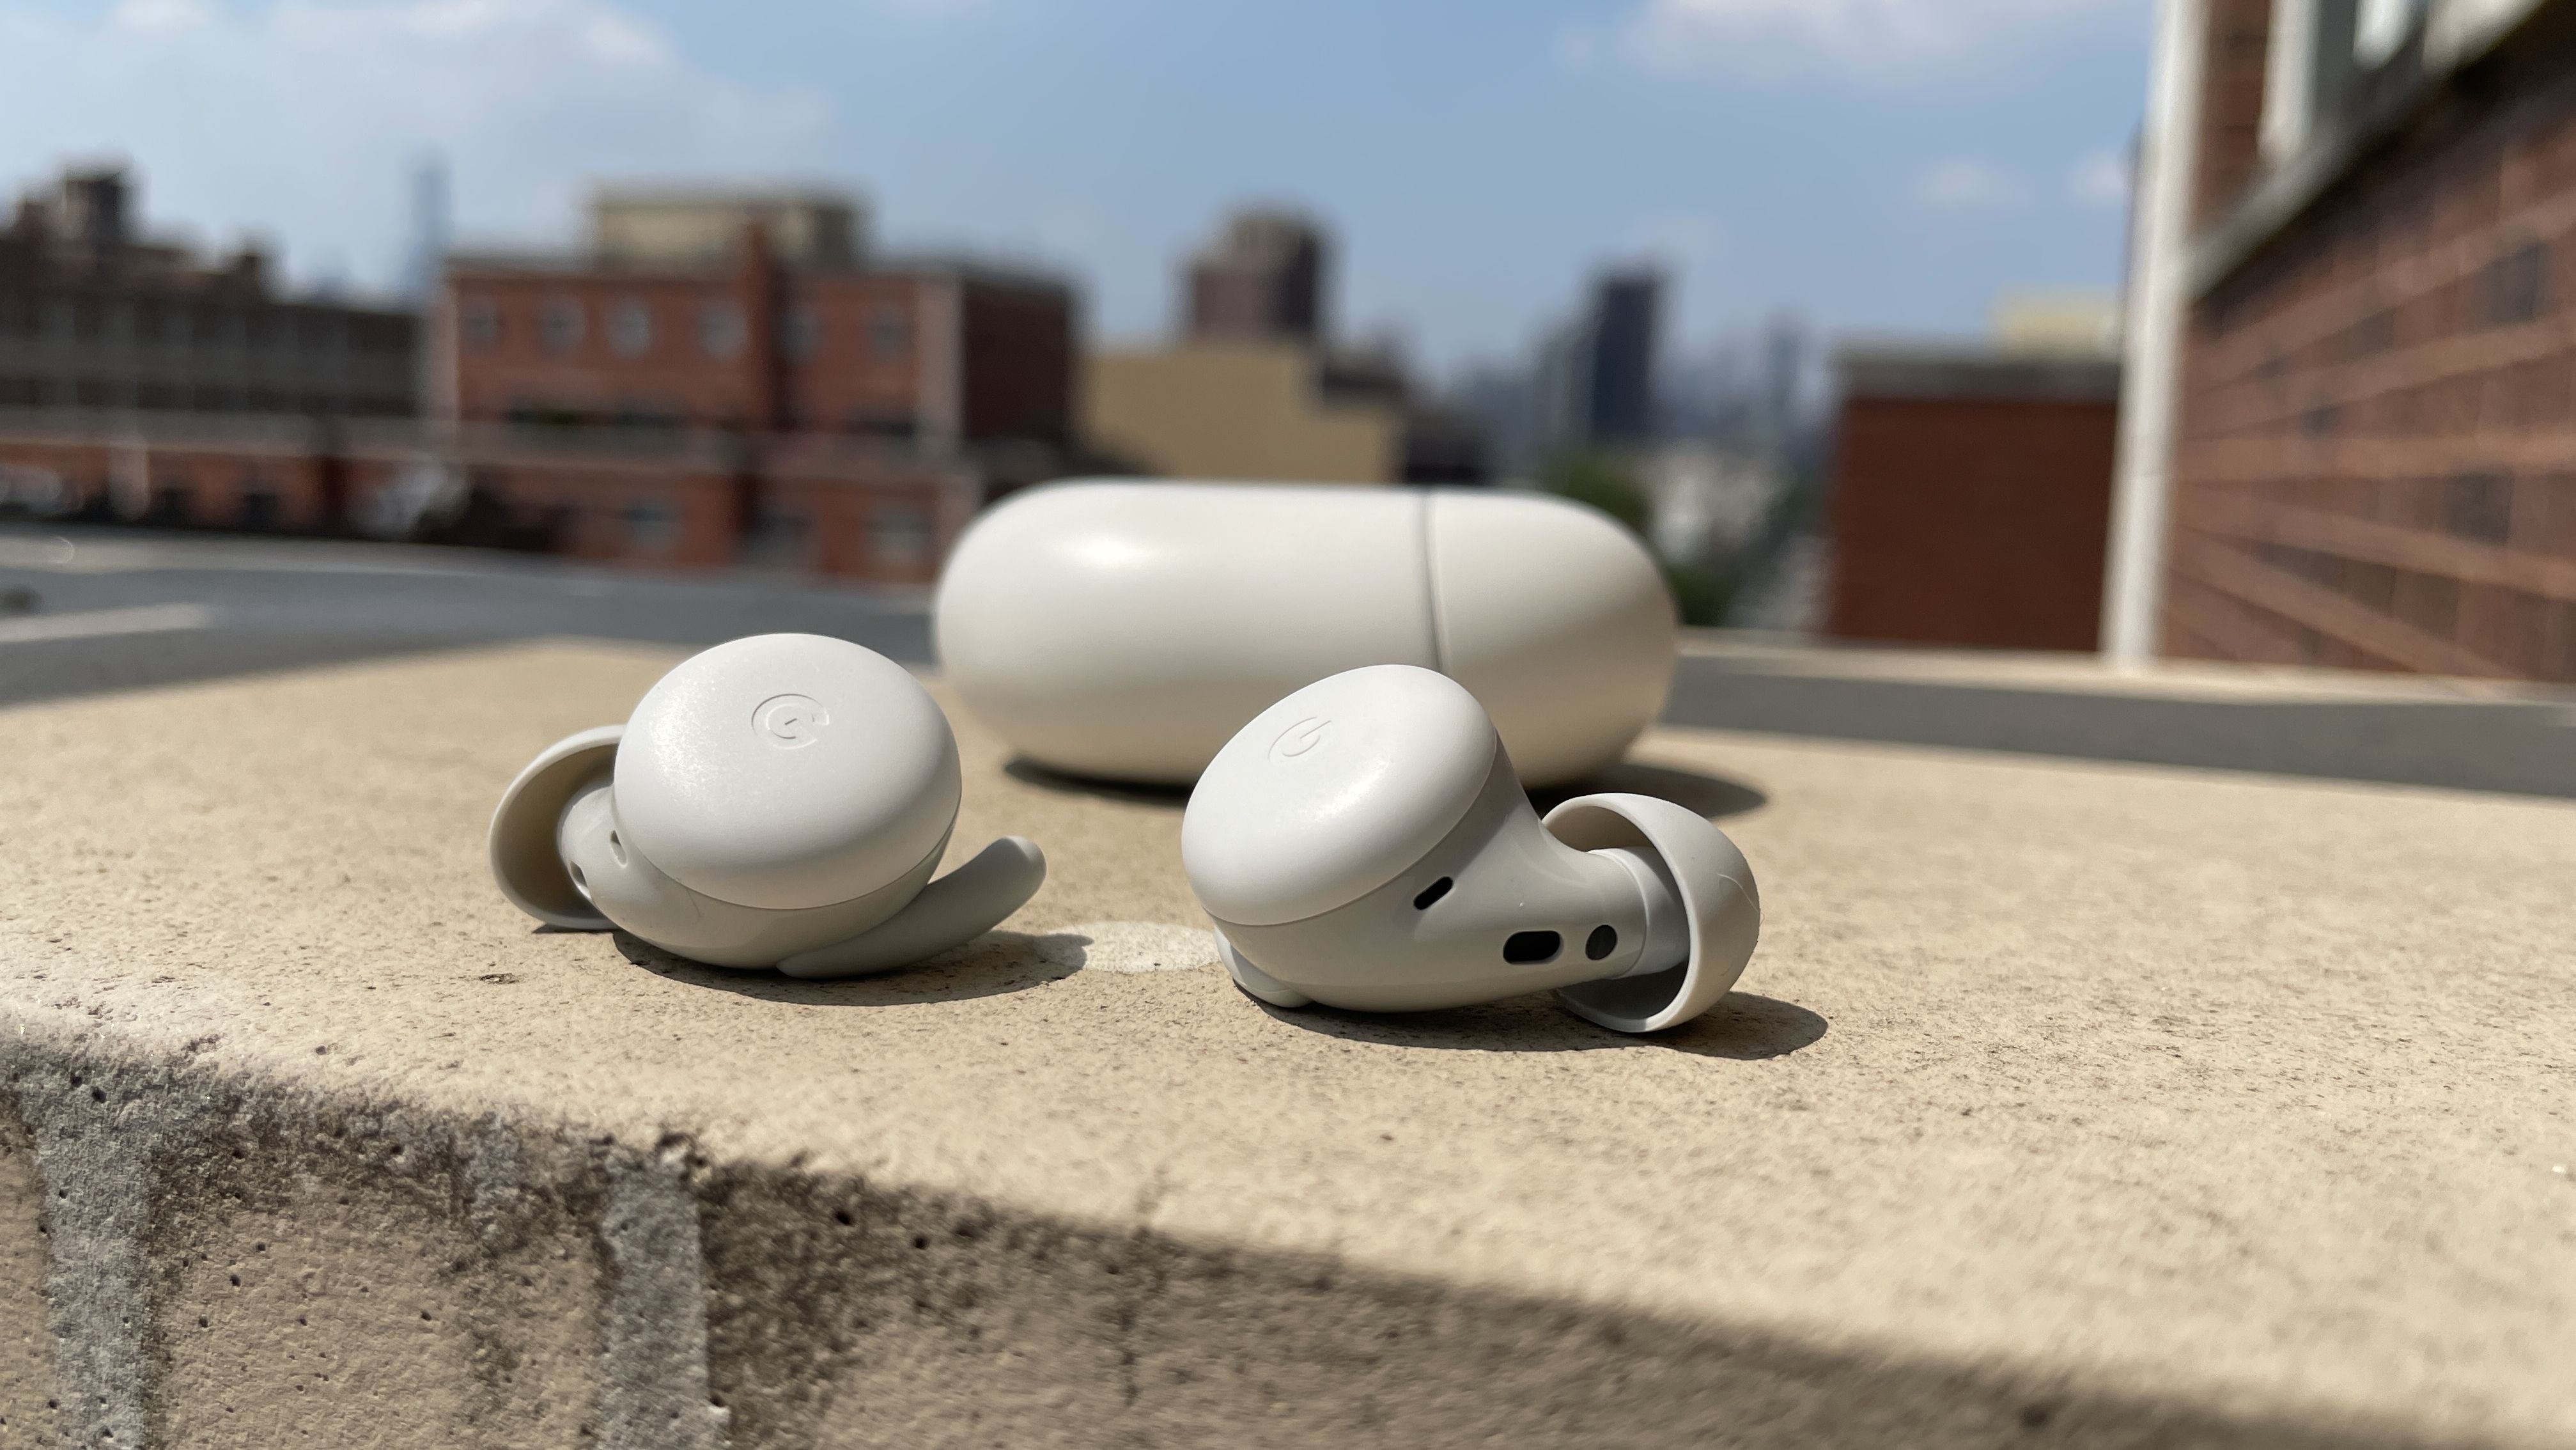 Google Pixel Buds A Series review: €99 wireless earphones have